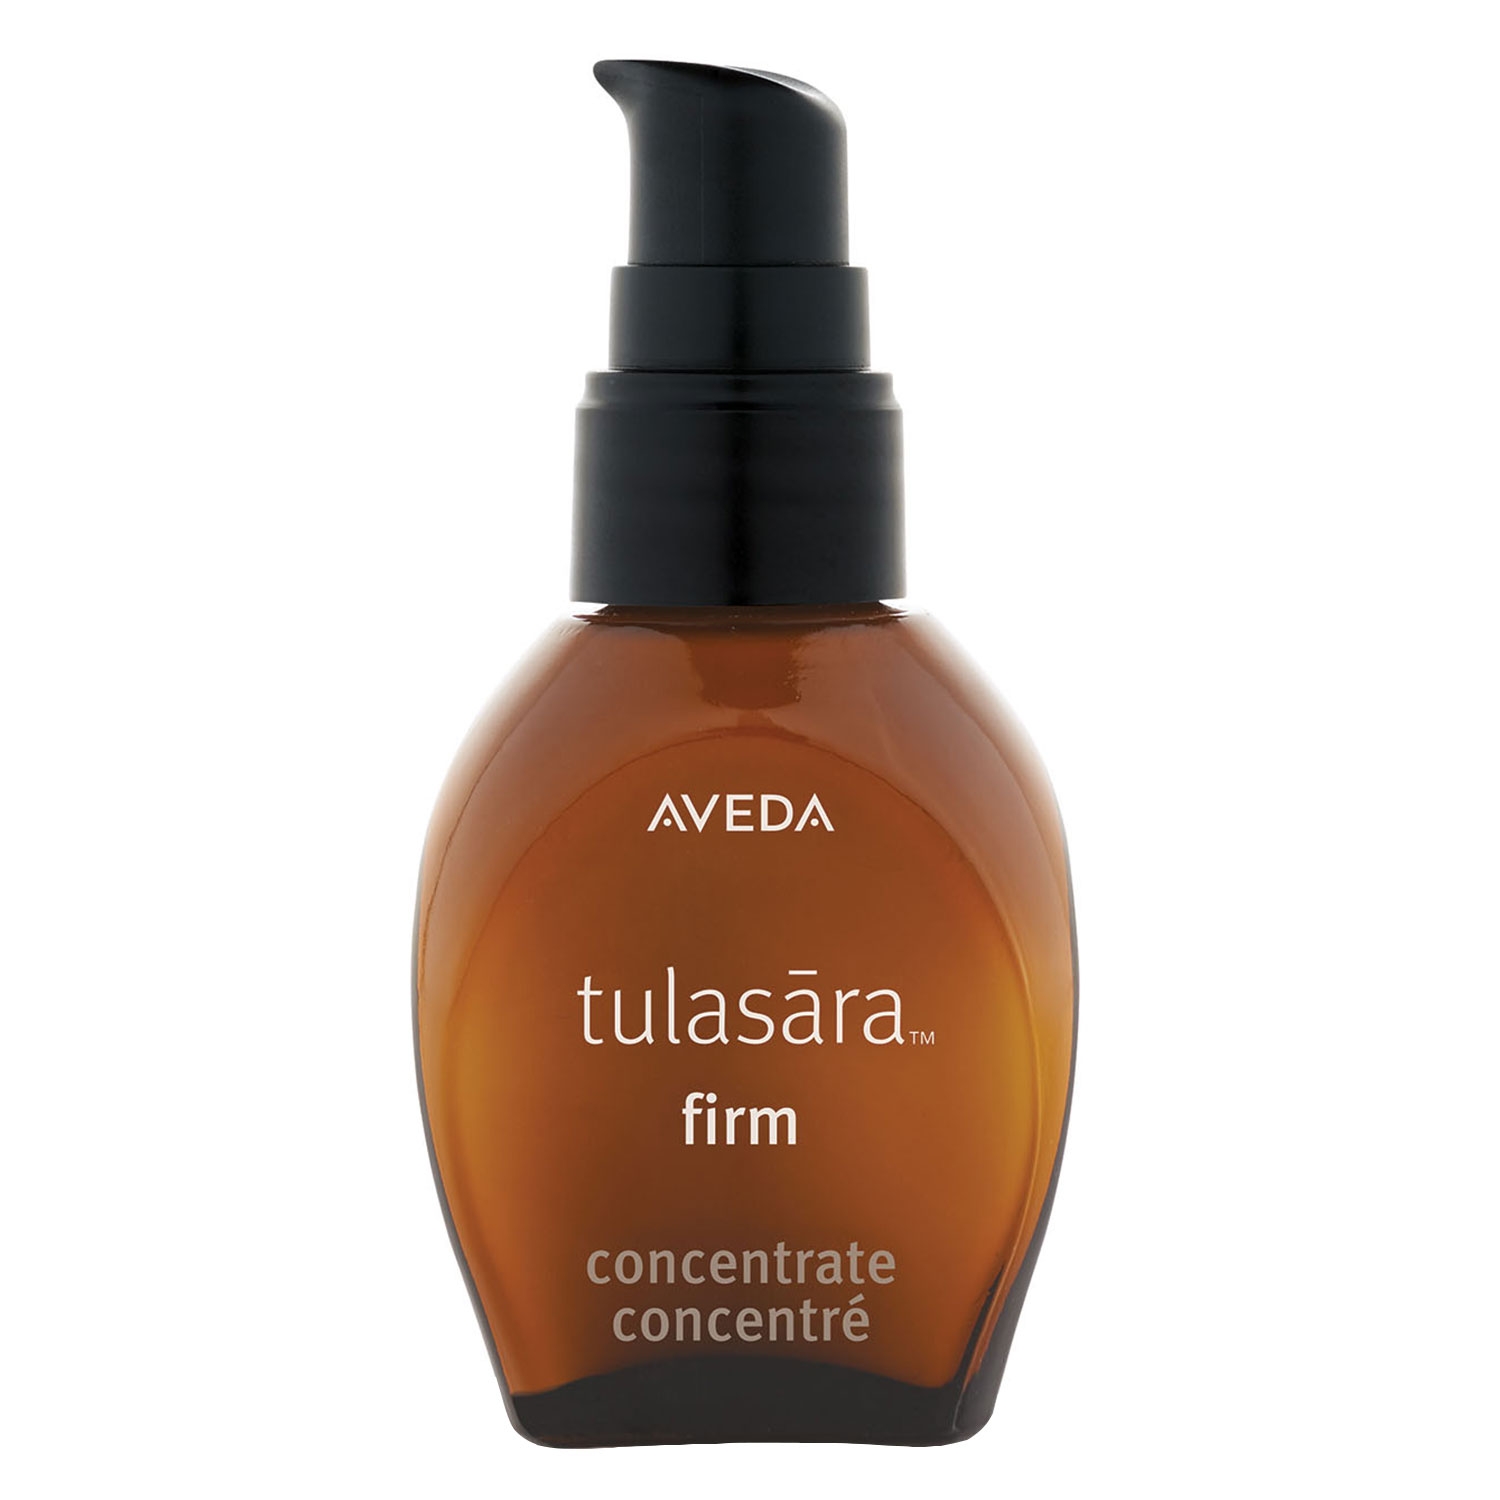 Product image from tulasara - firm concentrate